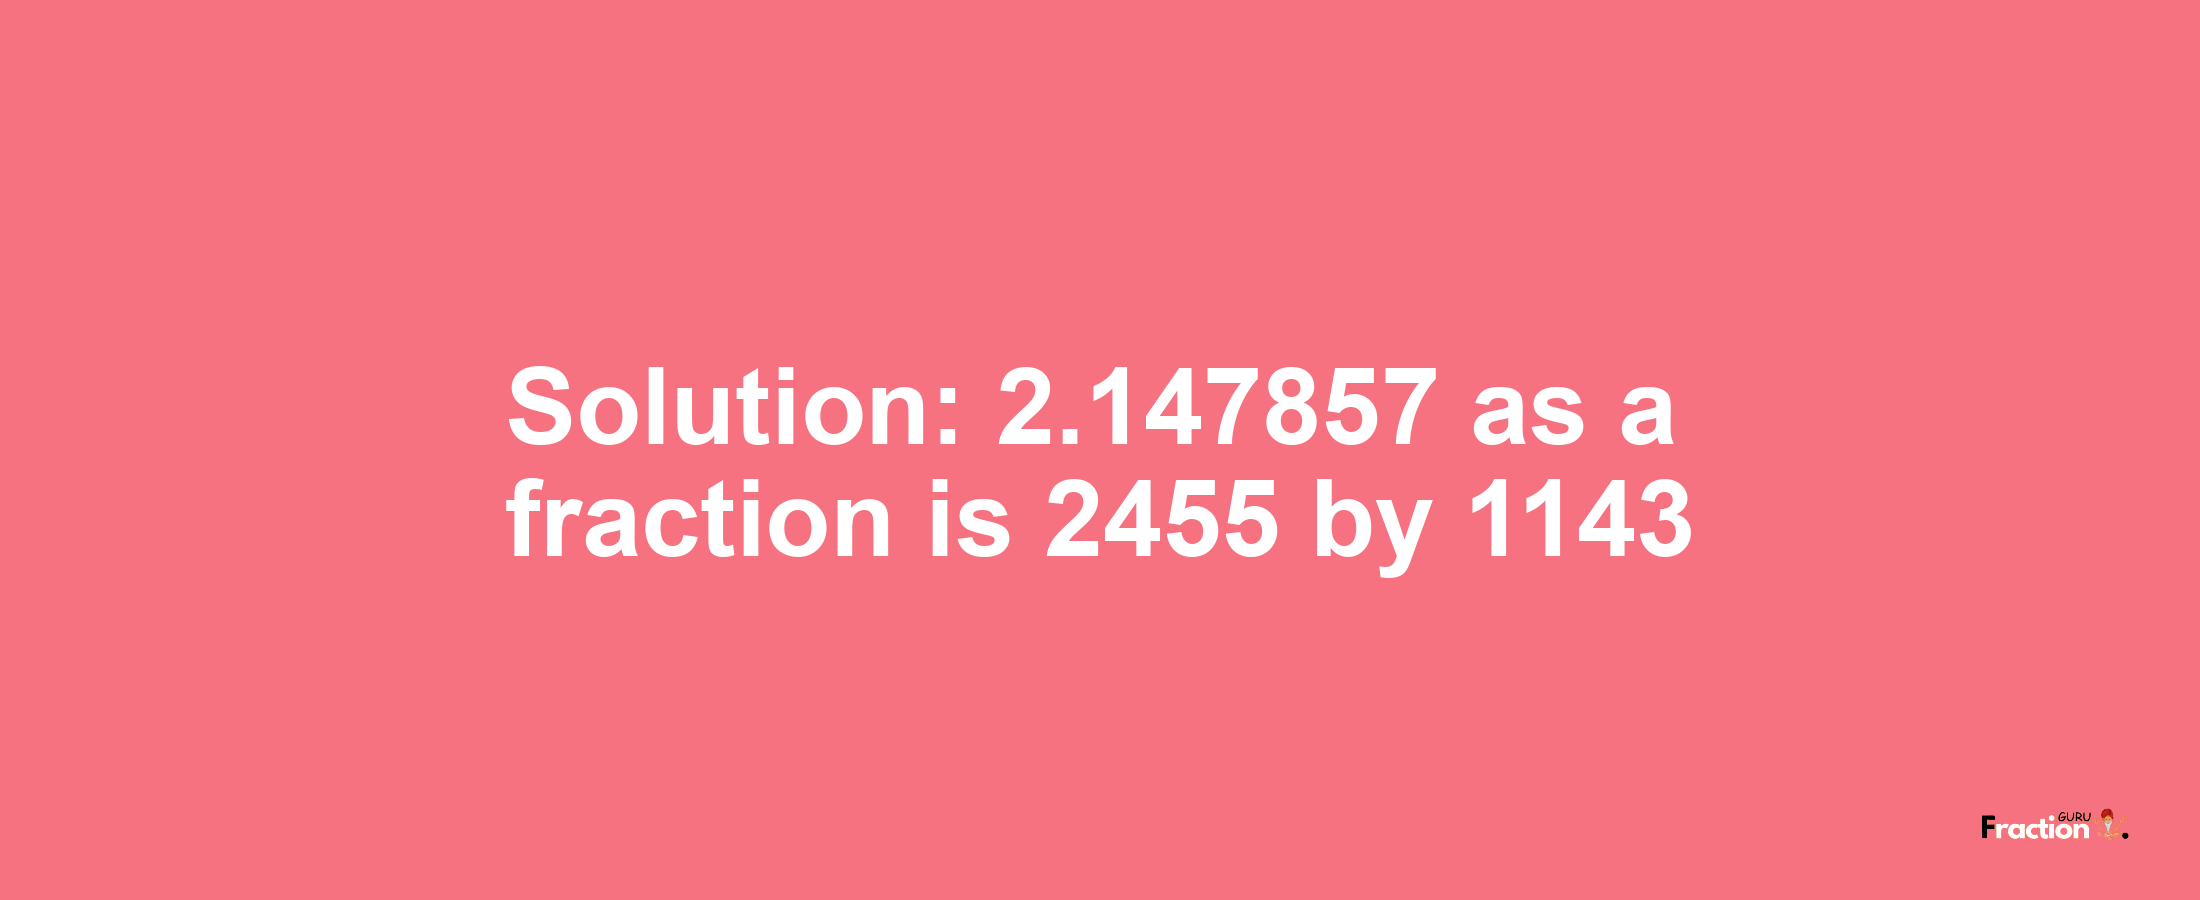 Solution:2.147857 as a fraction is 2455/1143